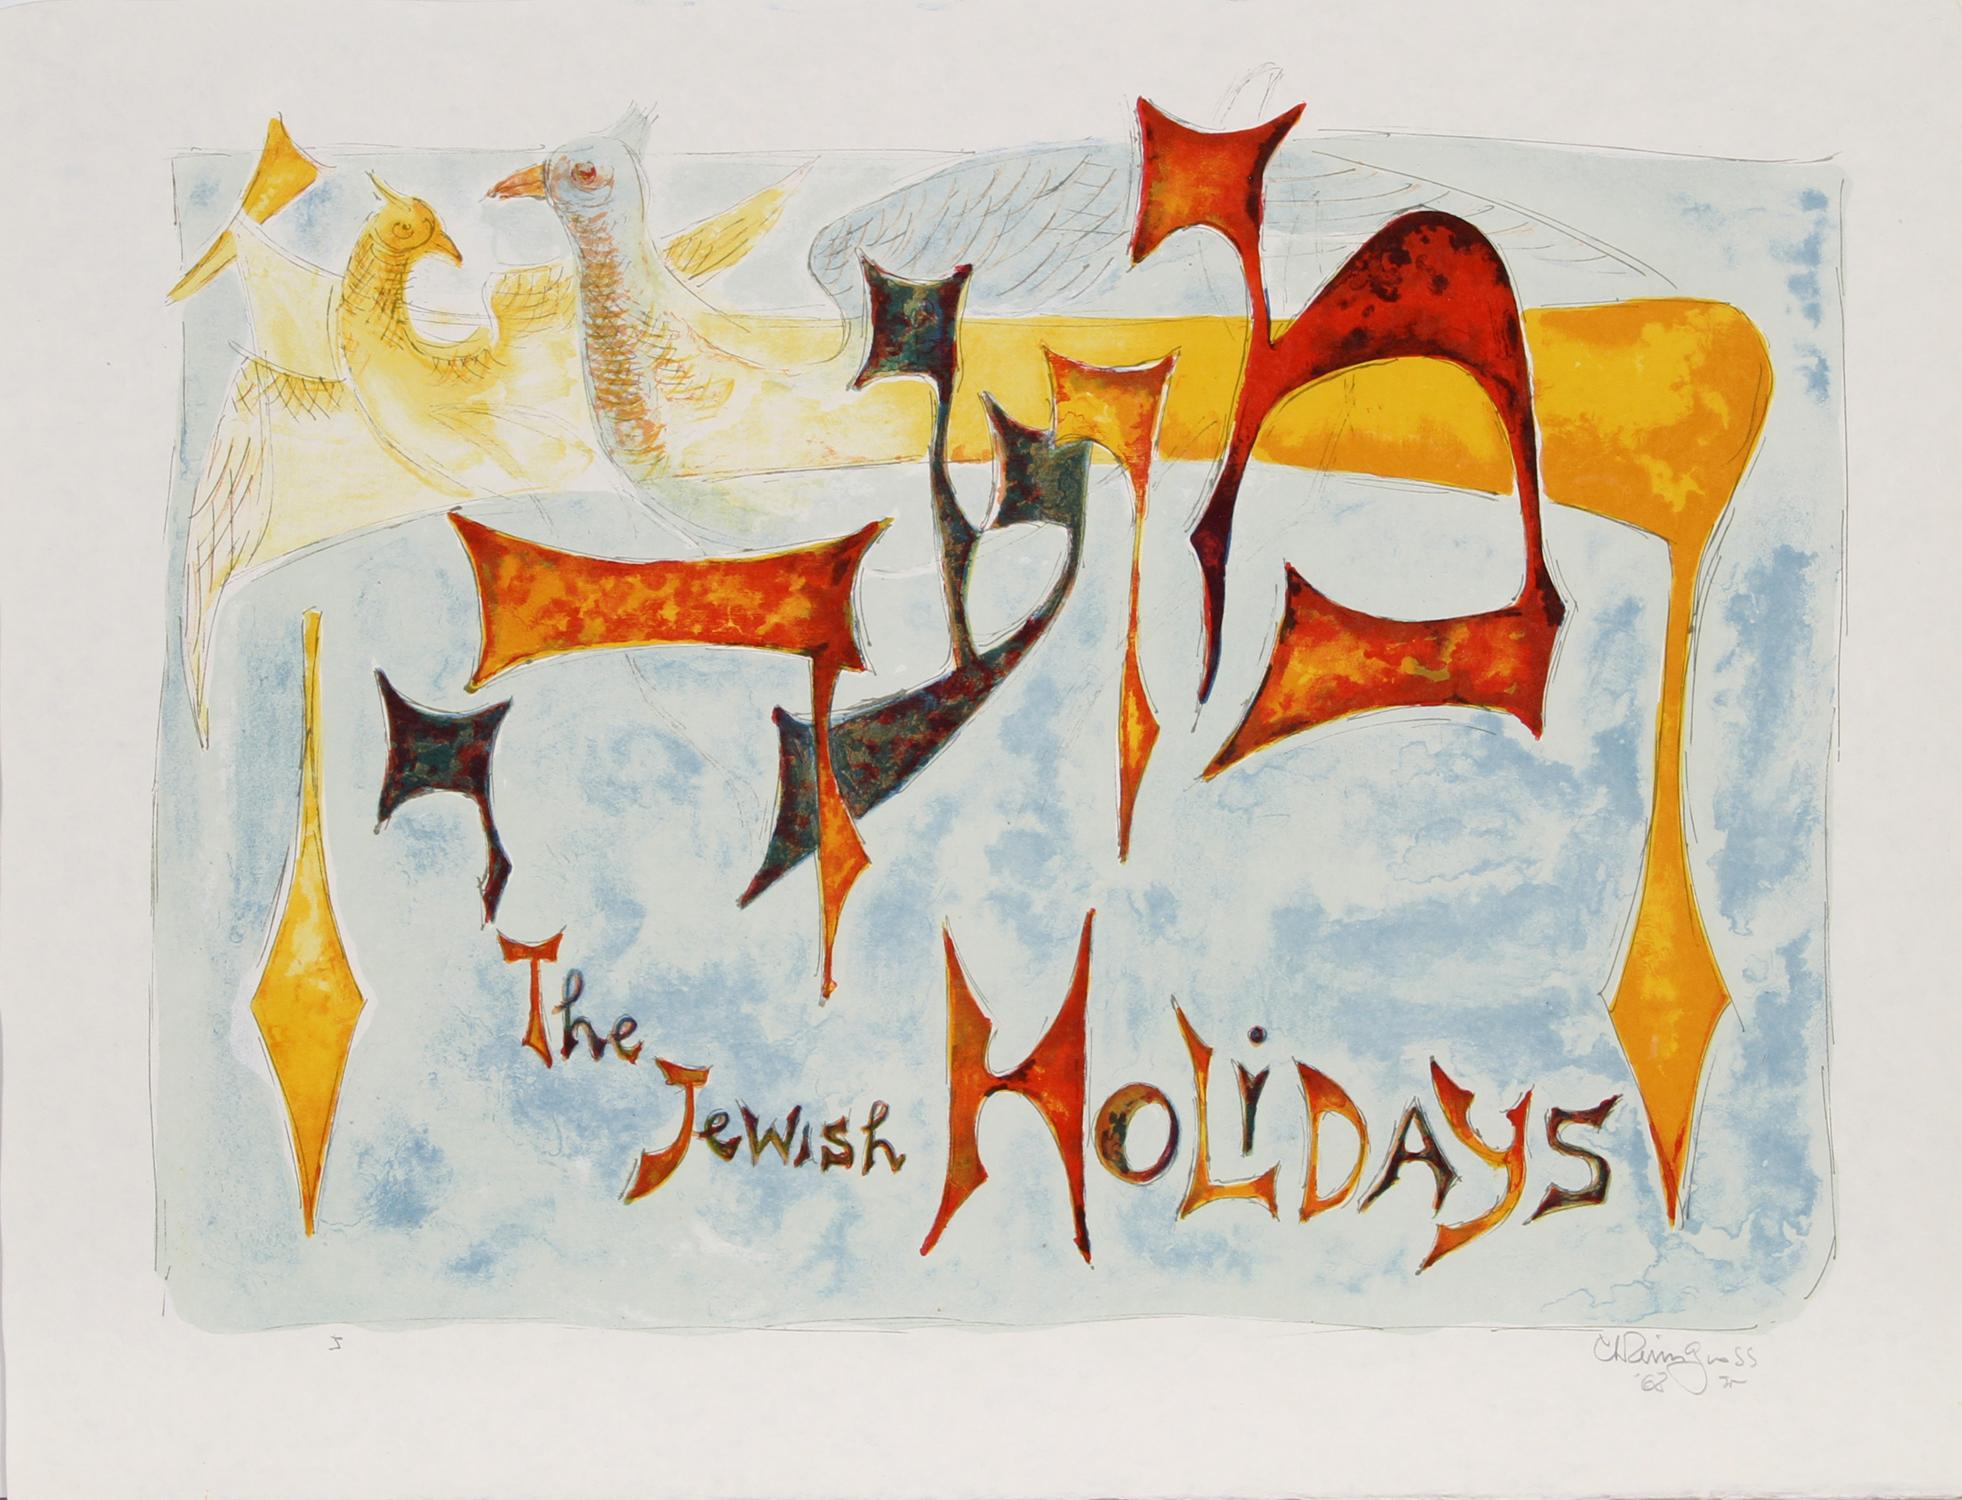 The Jewish Holidays, Portfolio of 22 lithographs by Chaim Gross 1969